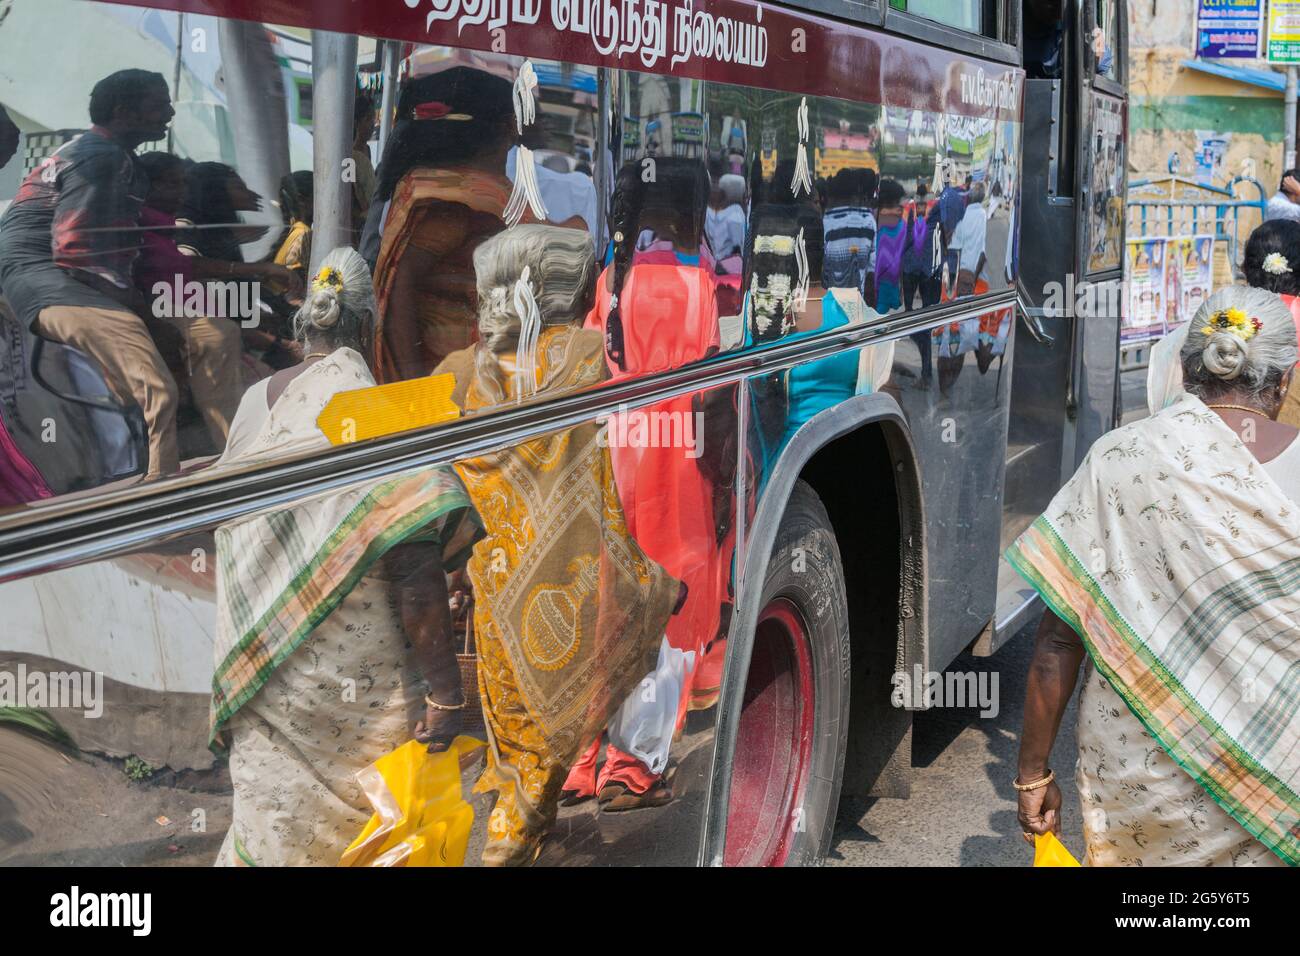 Reflection on silver bus of Indian passenger wearing sari walking past bus at Indian bus stand, Trichy, Tamil Nadu, India Stock Photo